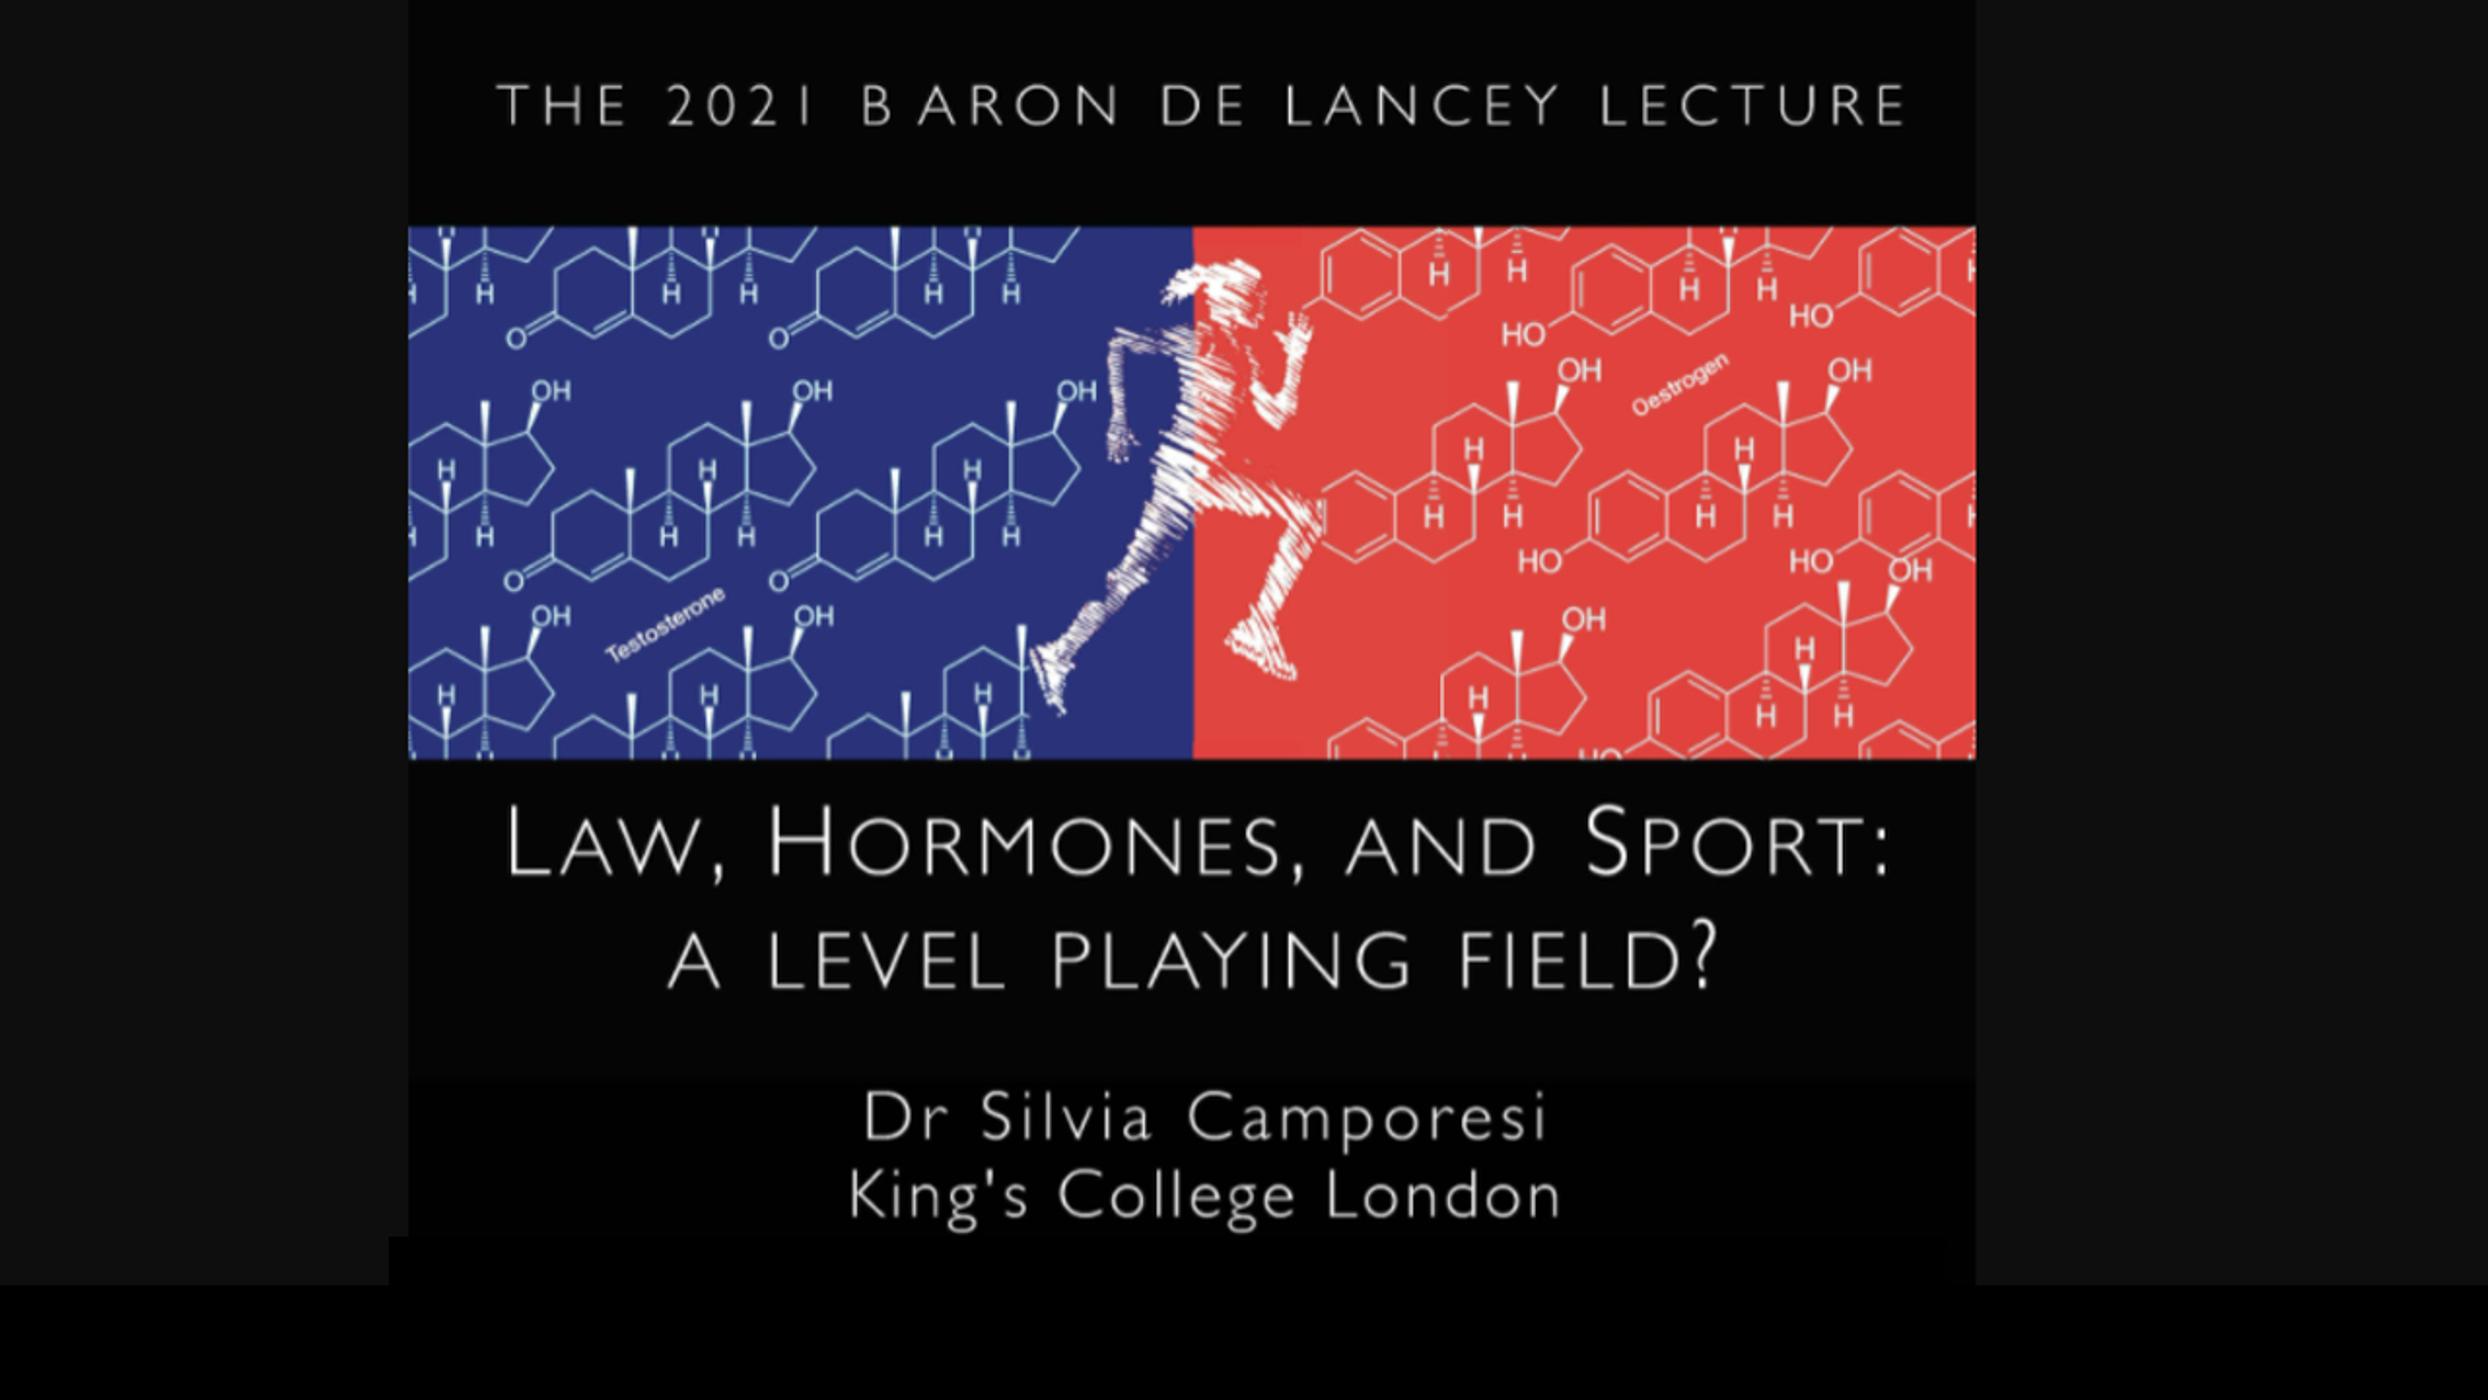 ’Law, Hormones, and Sport: a level playing field?’: The Baron Ver Heyden de Lancey Lecture 2021 (audio)